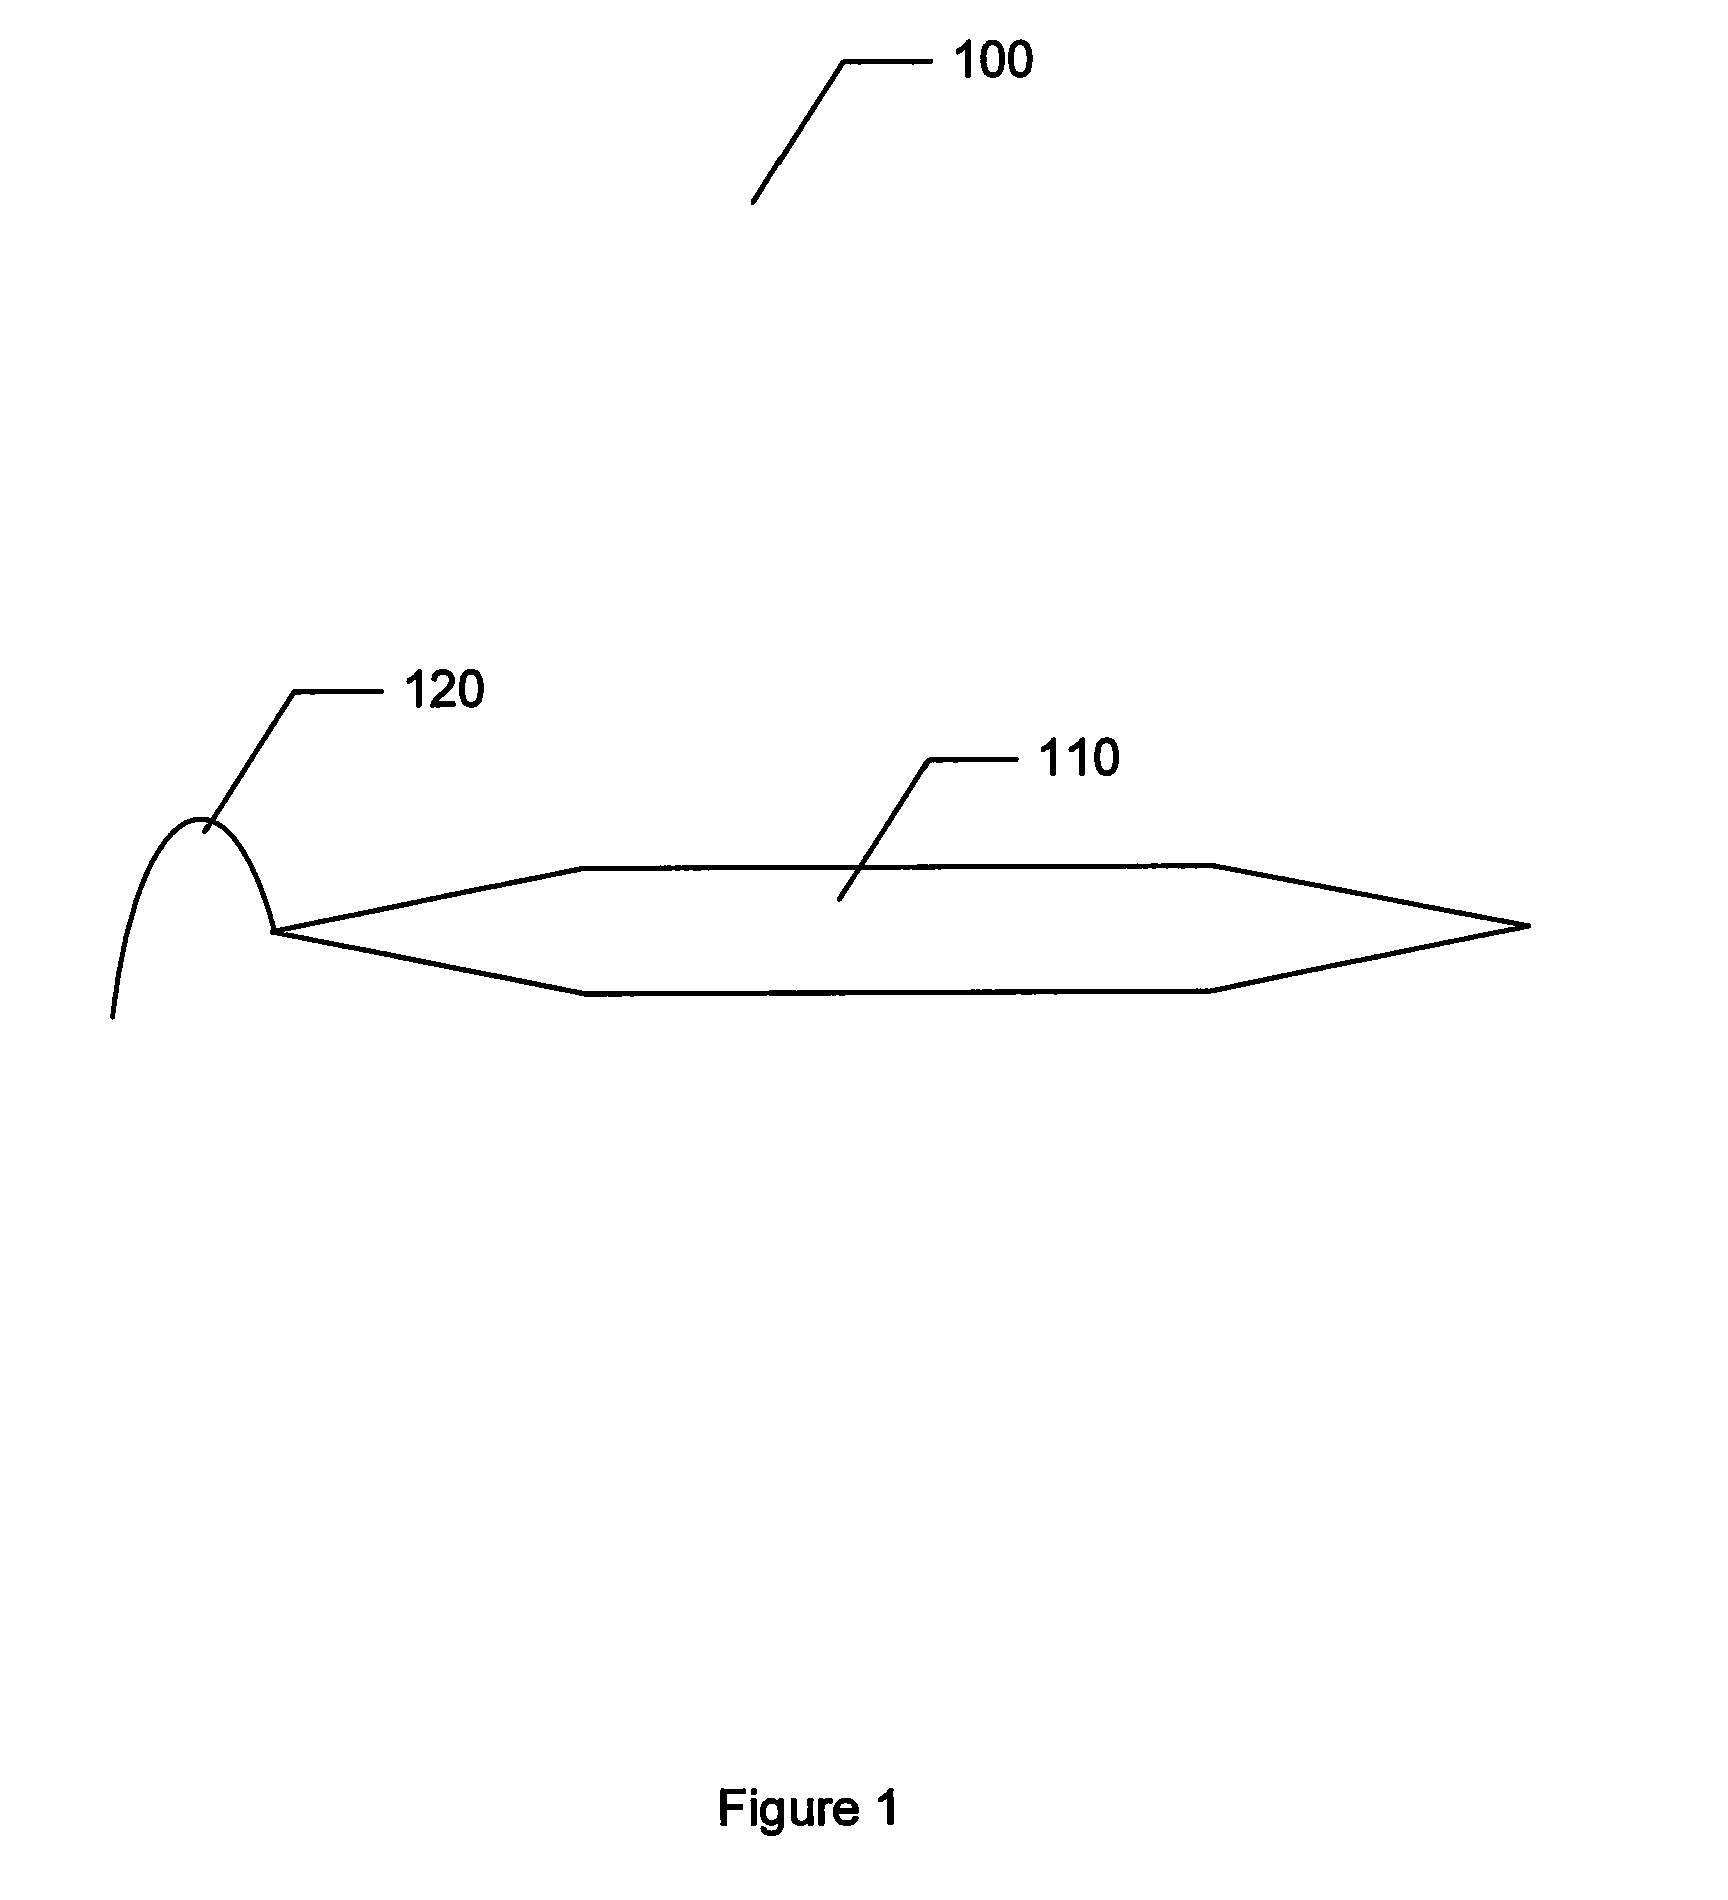 Hand-held dental tool dispensing device with removable display